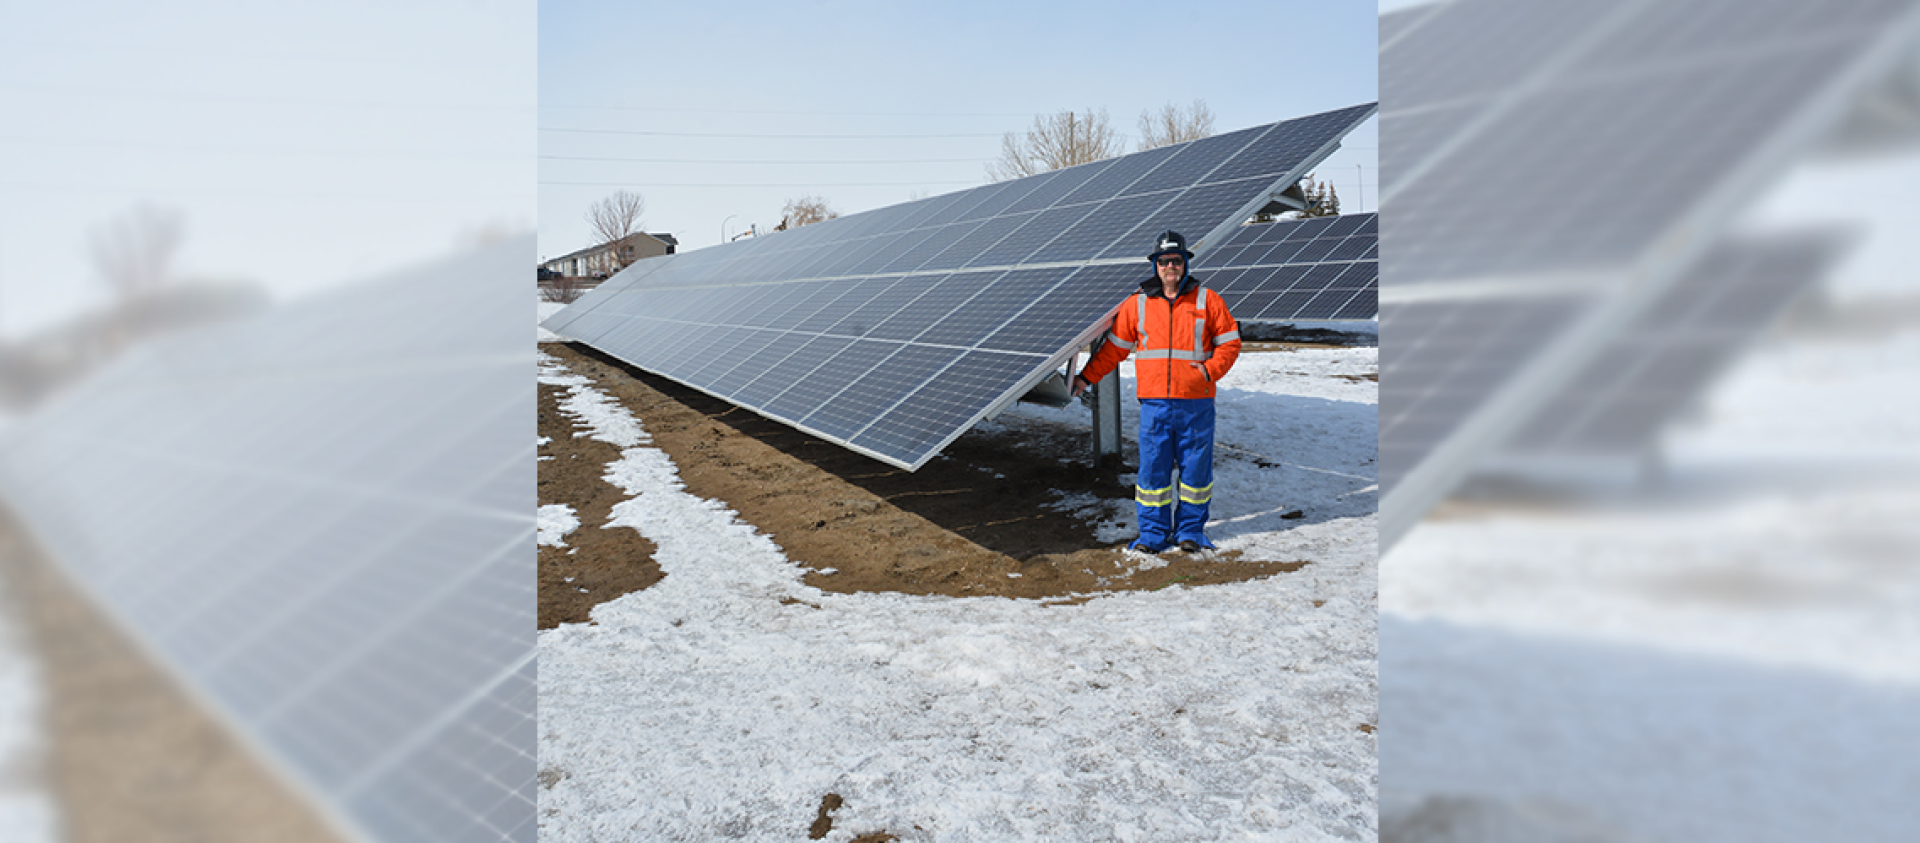 A SaskEnergy employee wearing an orange coat, blue pants and black hardhat, stands in front of a solar panel installation. Some snow is on the ground, with brown grass peeking through.